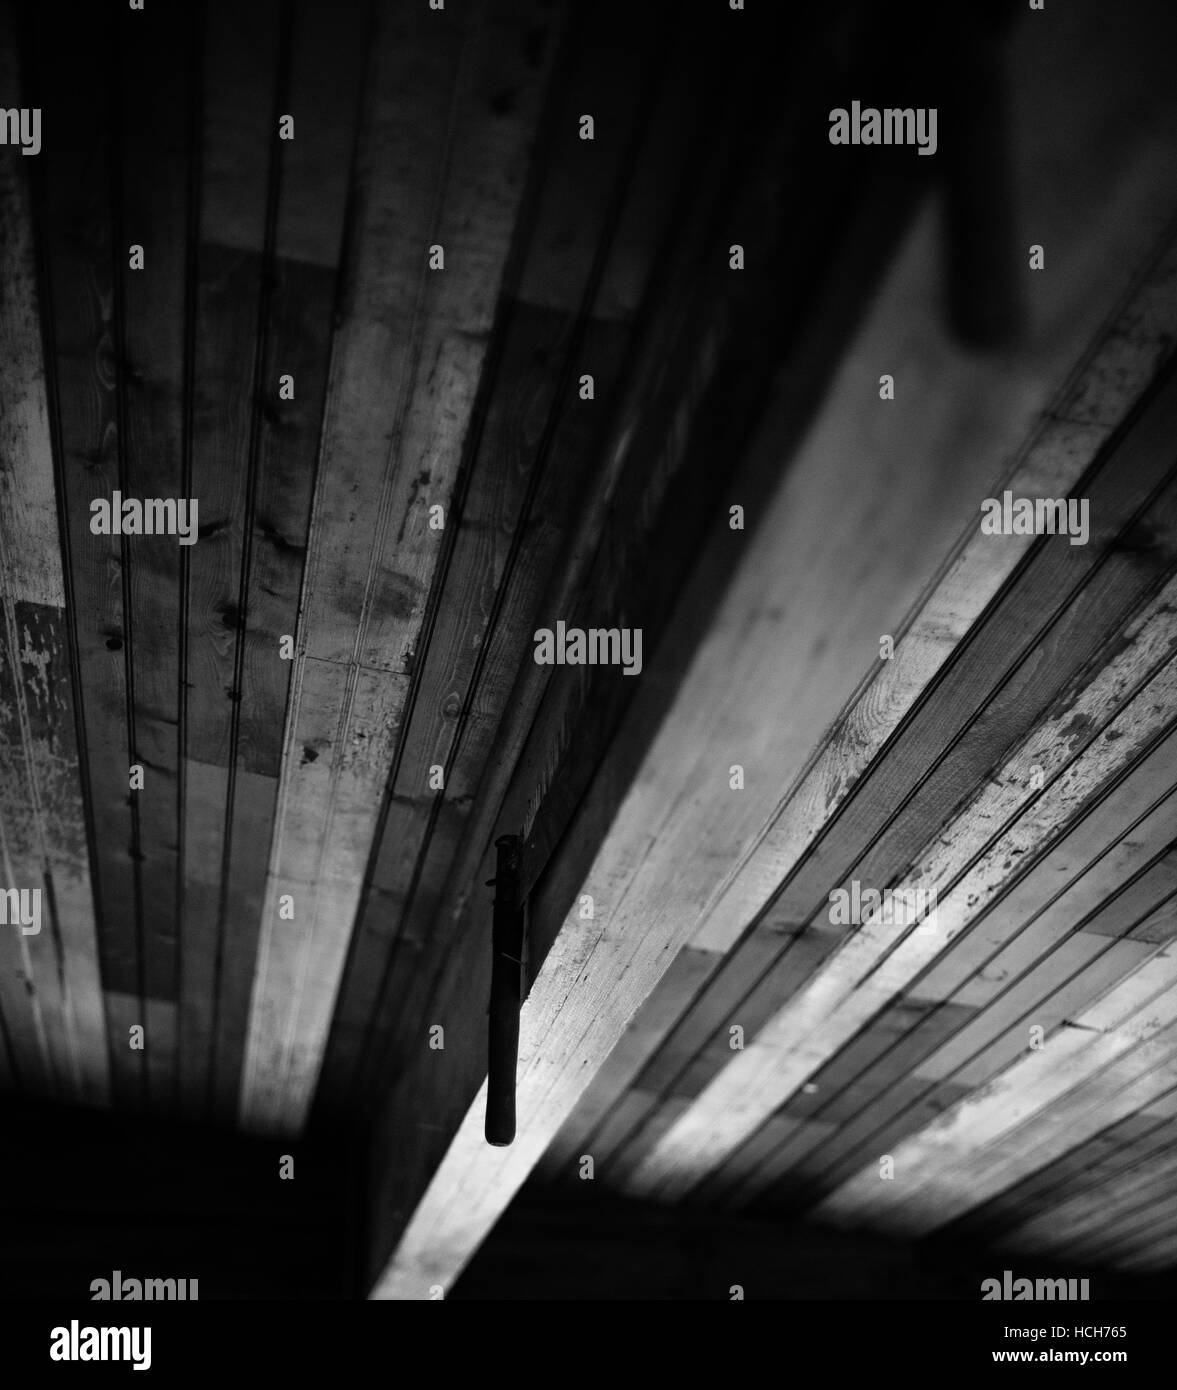 Ceiling built with wood flooring boards and a beam Stock Photo